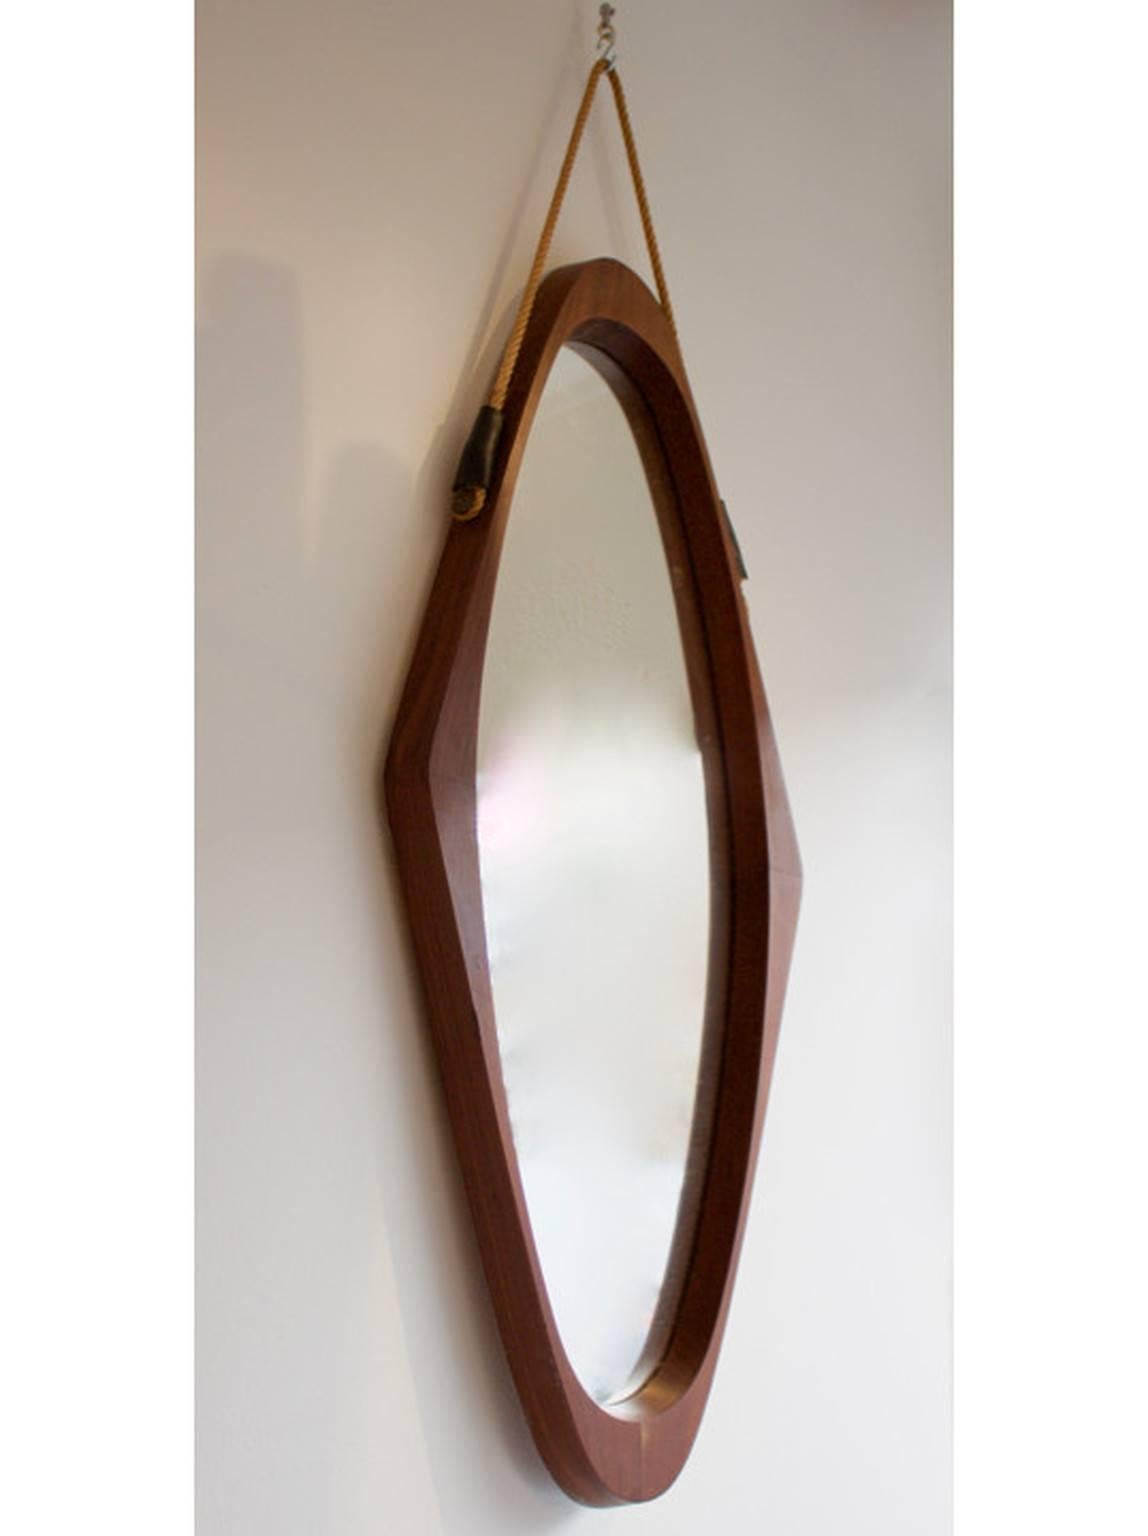 Large oval mirror with solid teak frame, and leather details, Italy, 1950s.

Very good original condition, with slight warping to the back board.

Dimensions: H 93cm x W 43cm x D 5cm.

We have a number of teak mirrors coming into the shop